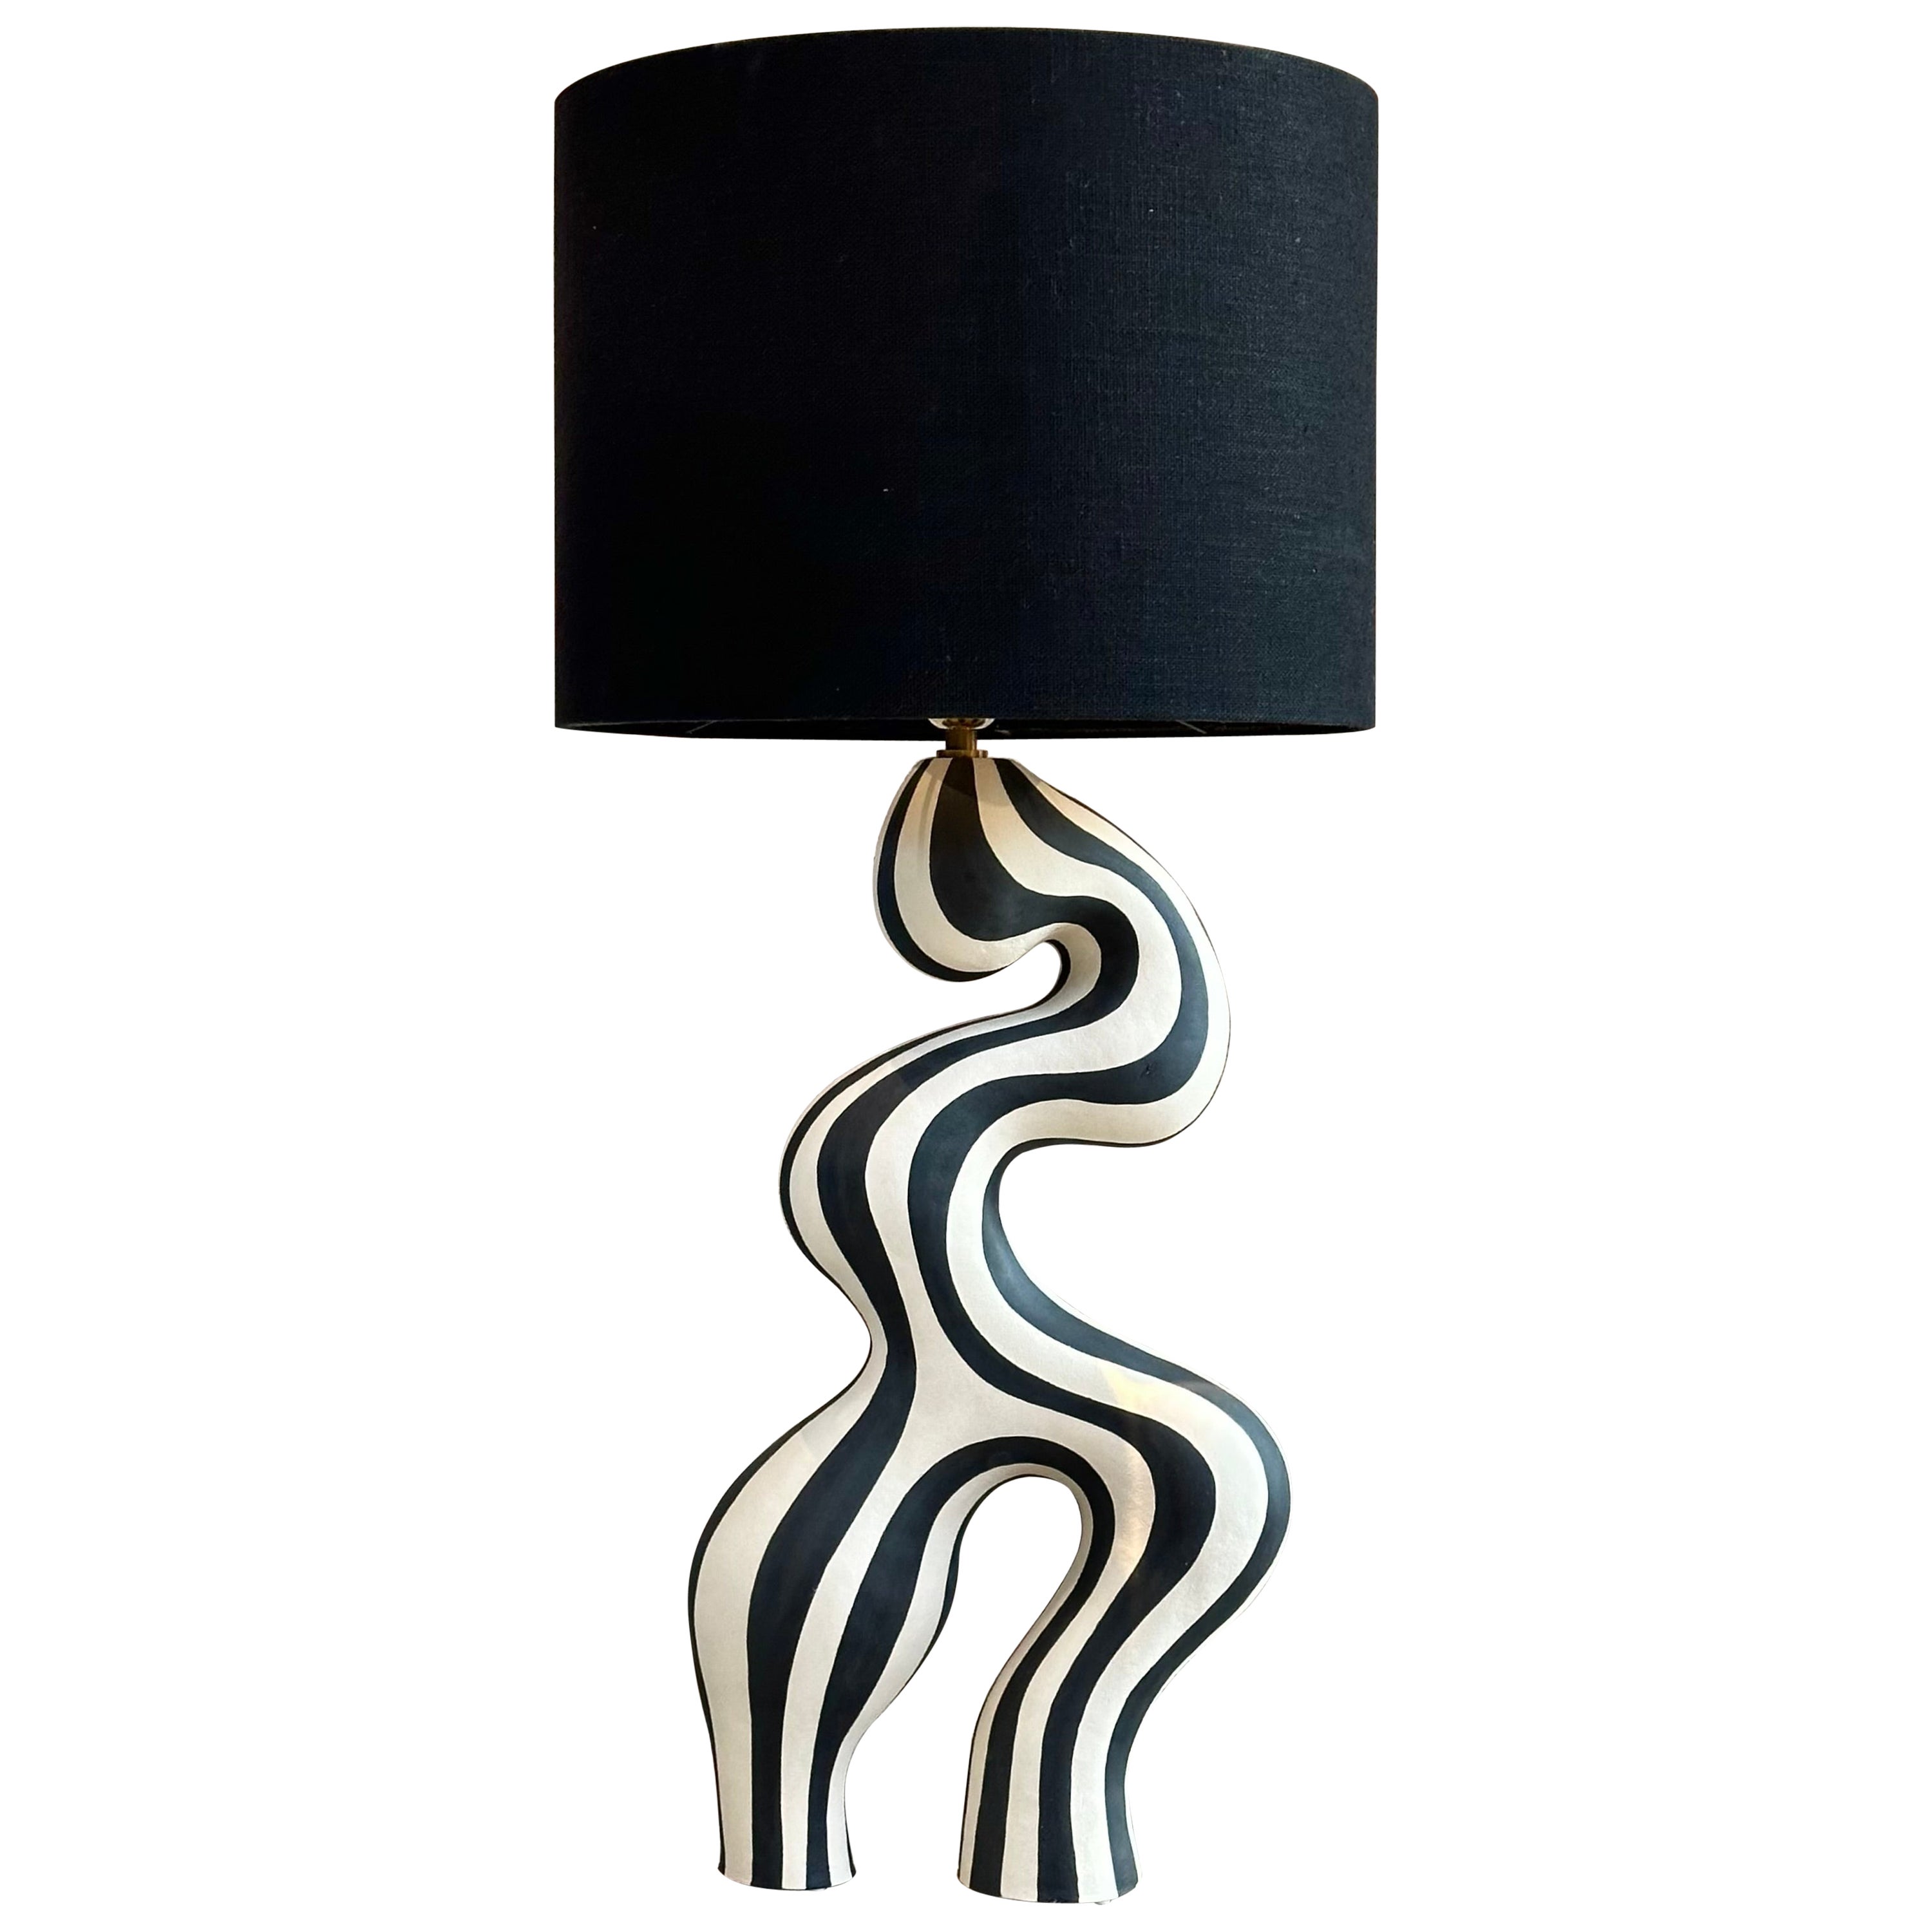 A statement piece designed and handcrafted by ceramic artist Johanne Birkeland who works under the artist name Jossolini. The lamp base is hand built in white stoneware clay, and hand decorated with black matte glaze. 

The Norwegian artist works